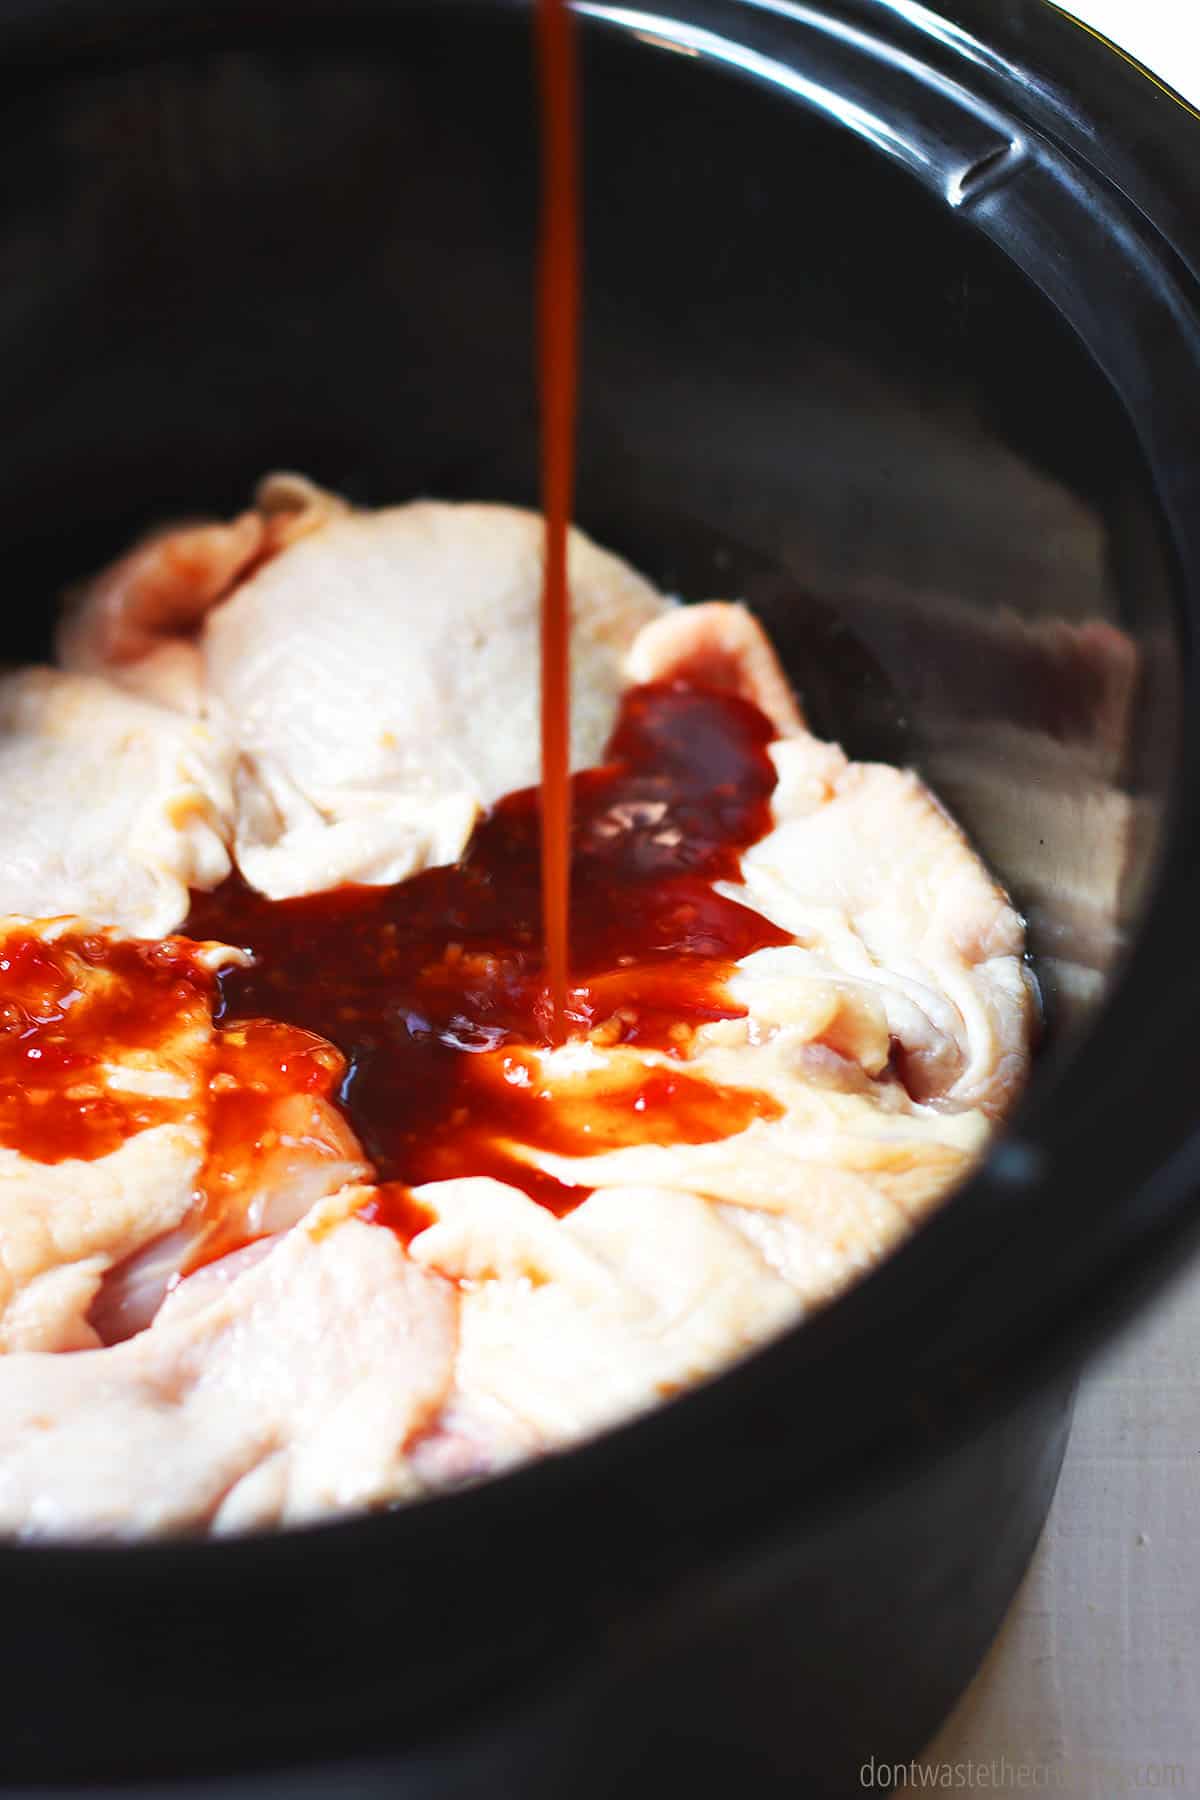 Sauce poured over raw chicken thighs in the crock pot, ready to be cooked as slow cooker chicken thighs